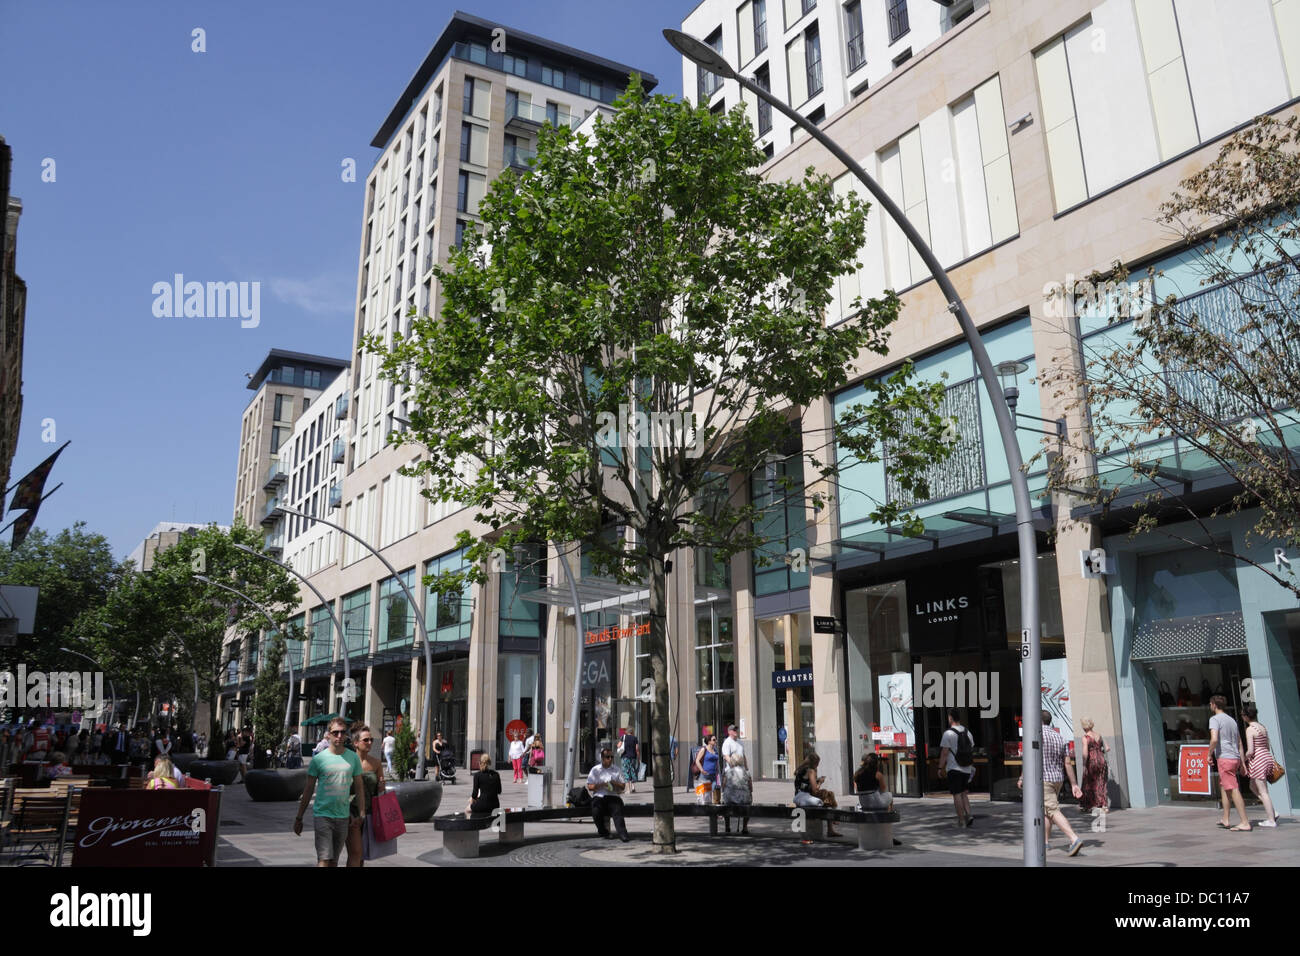 Shoppers walking on the Hayes in Cardiff city centre Wales UK. St Davids 2 building. pedestrian street scene traffic free Stock Photo